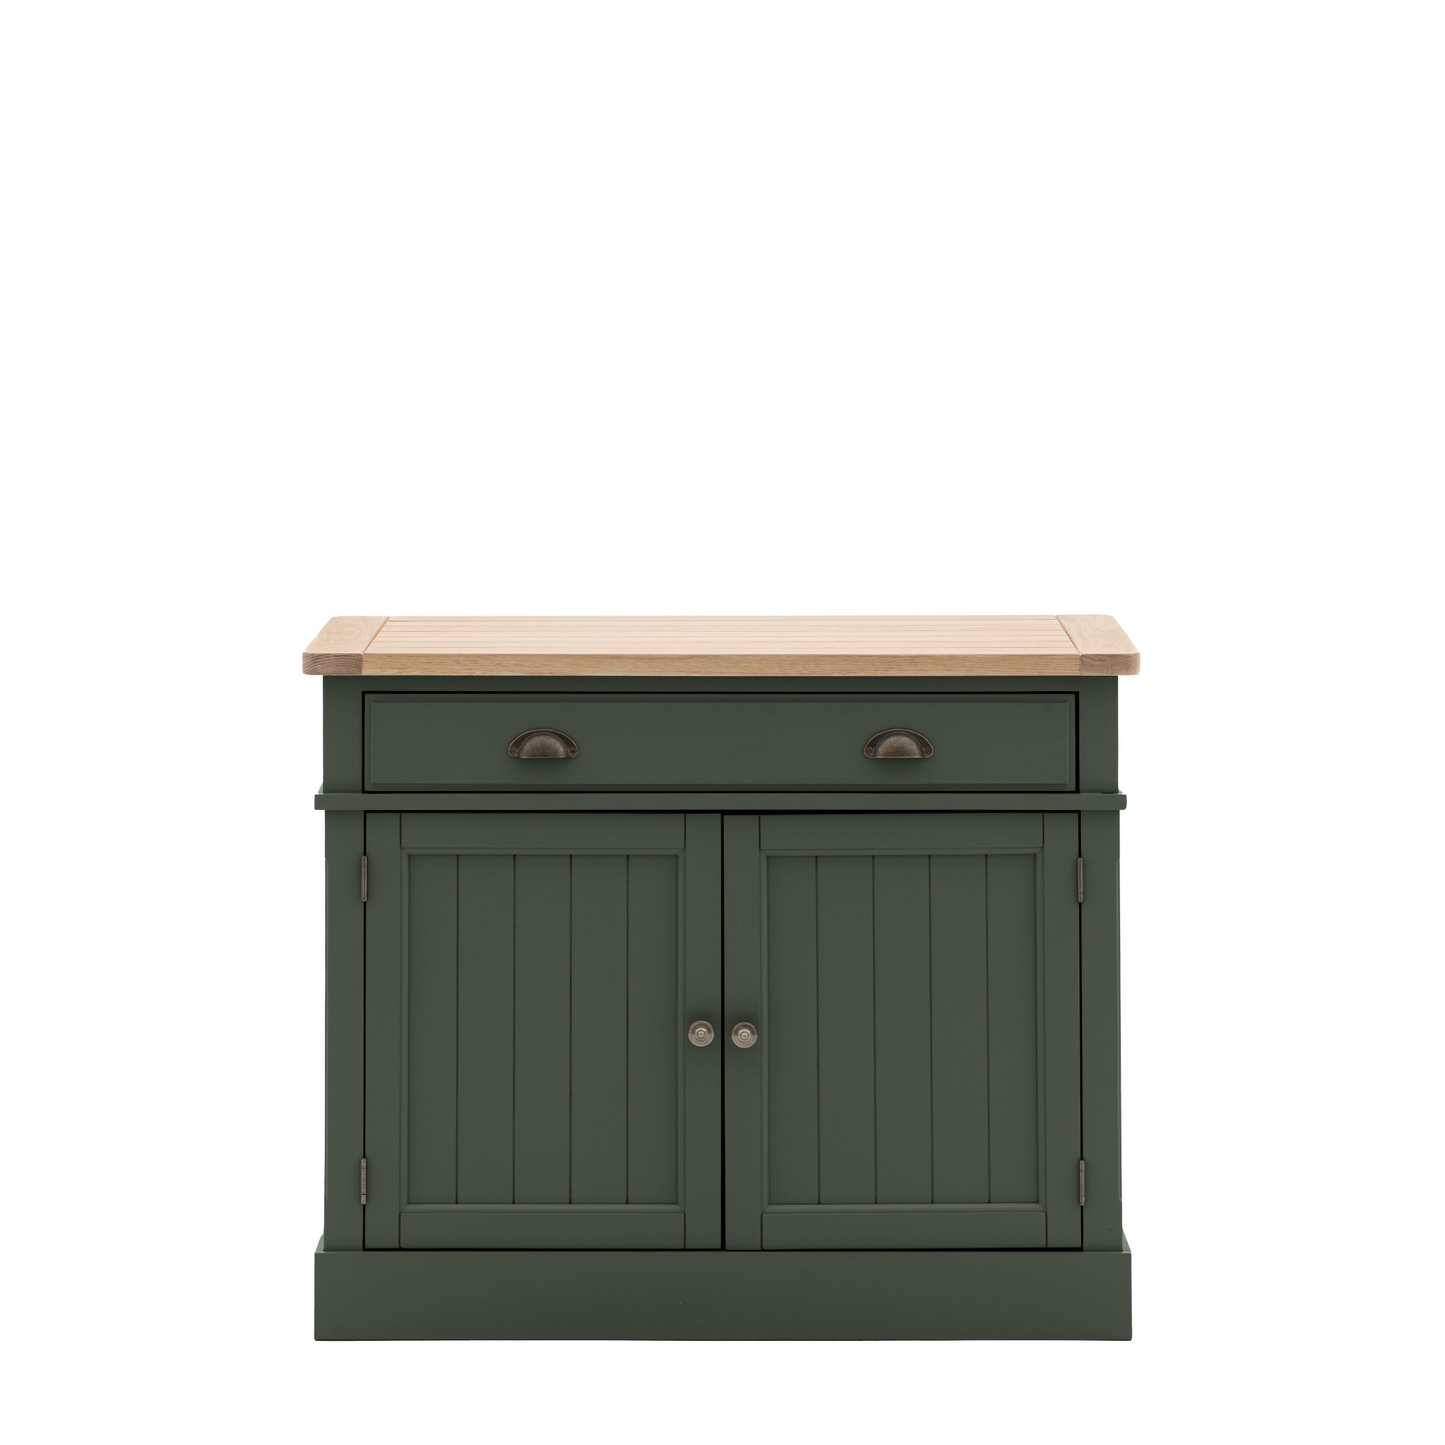 A Buckland 2 Door 1 Drawer Sideboard in Moss for interior decor.